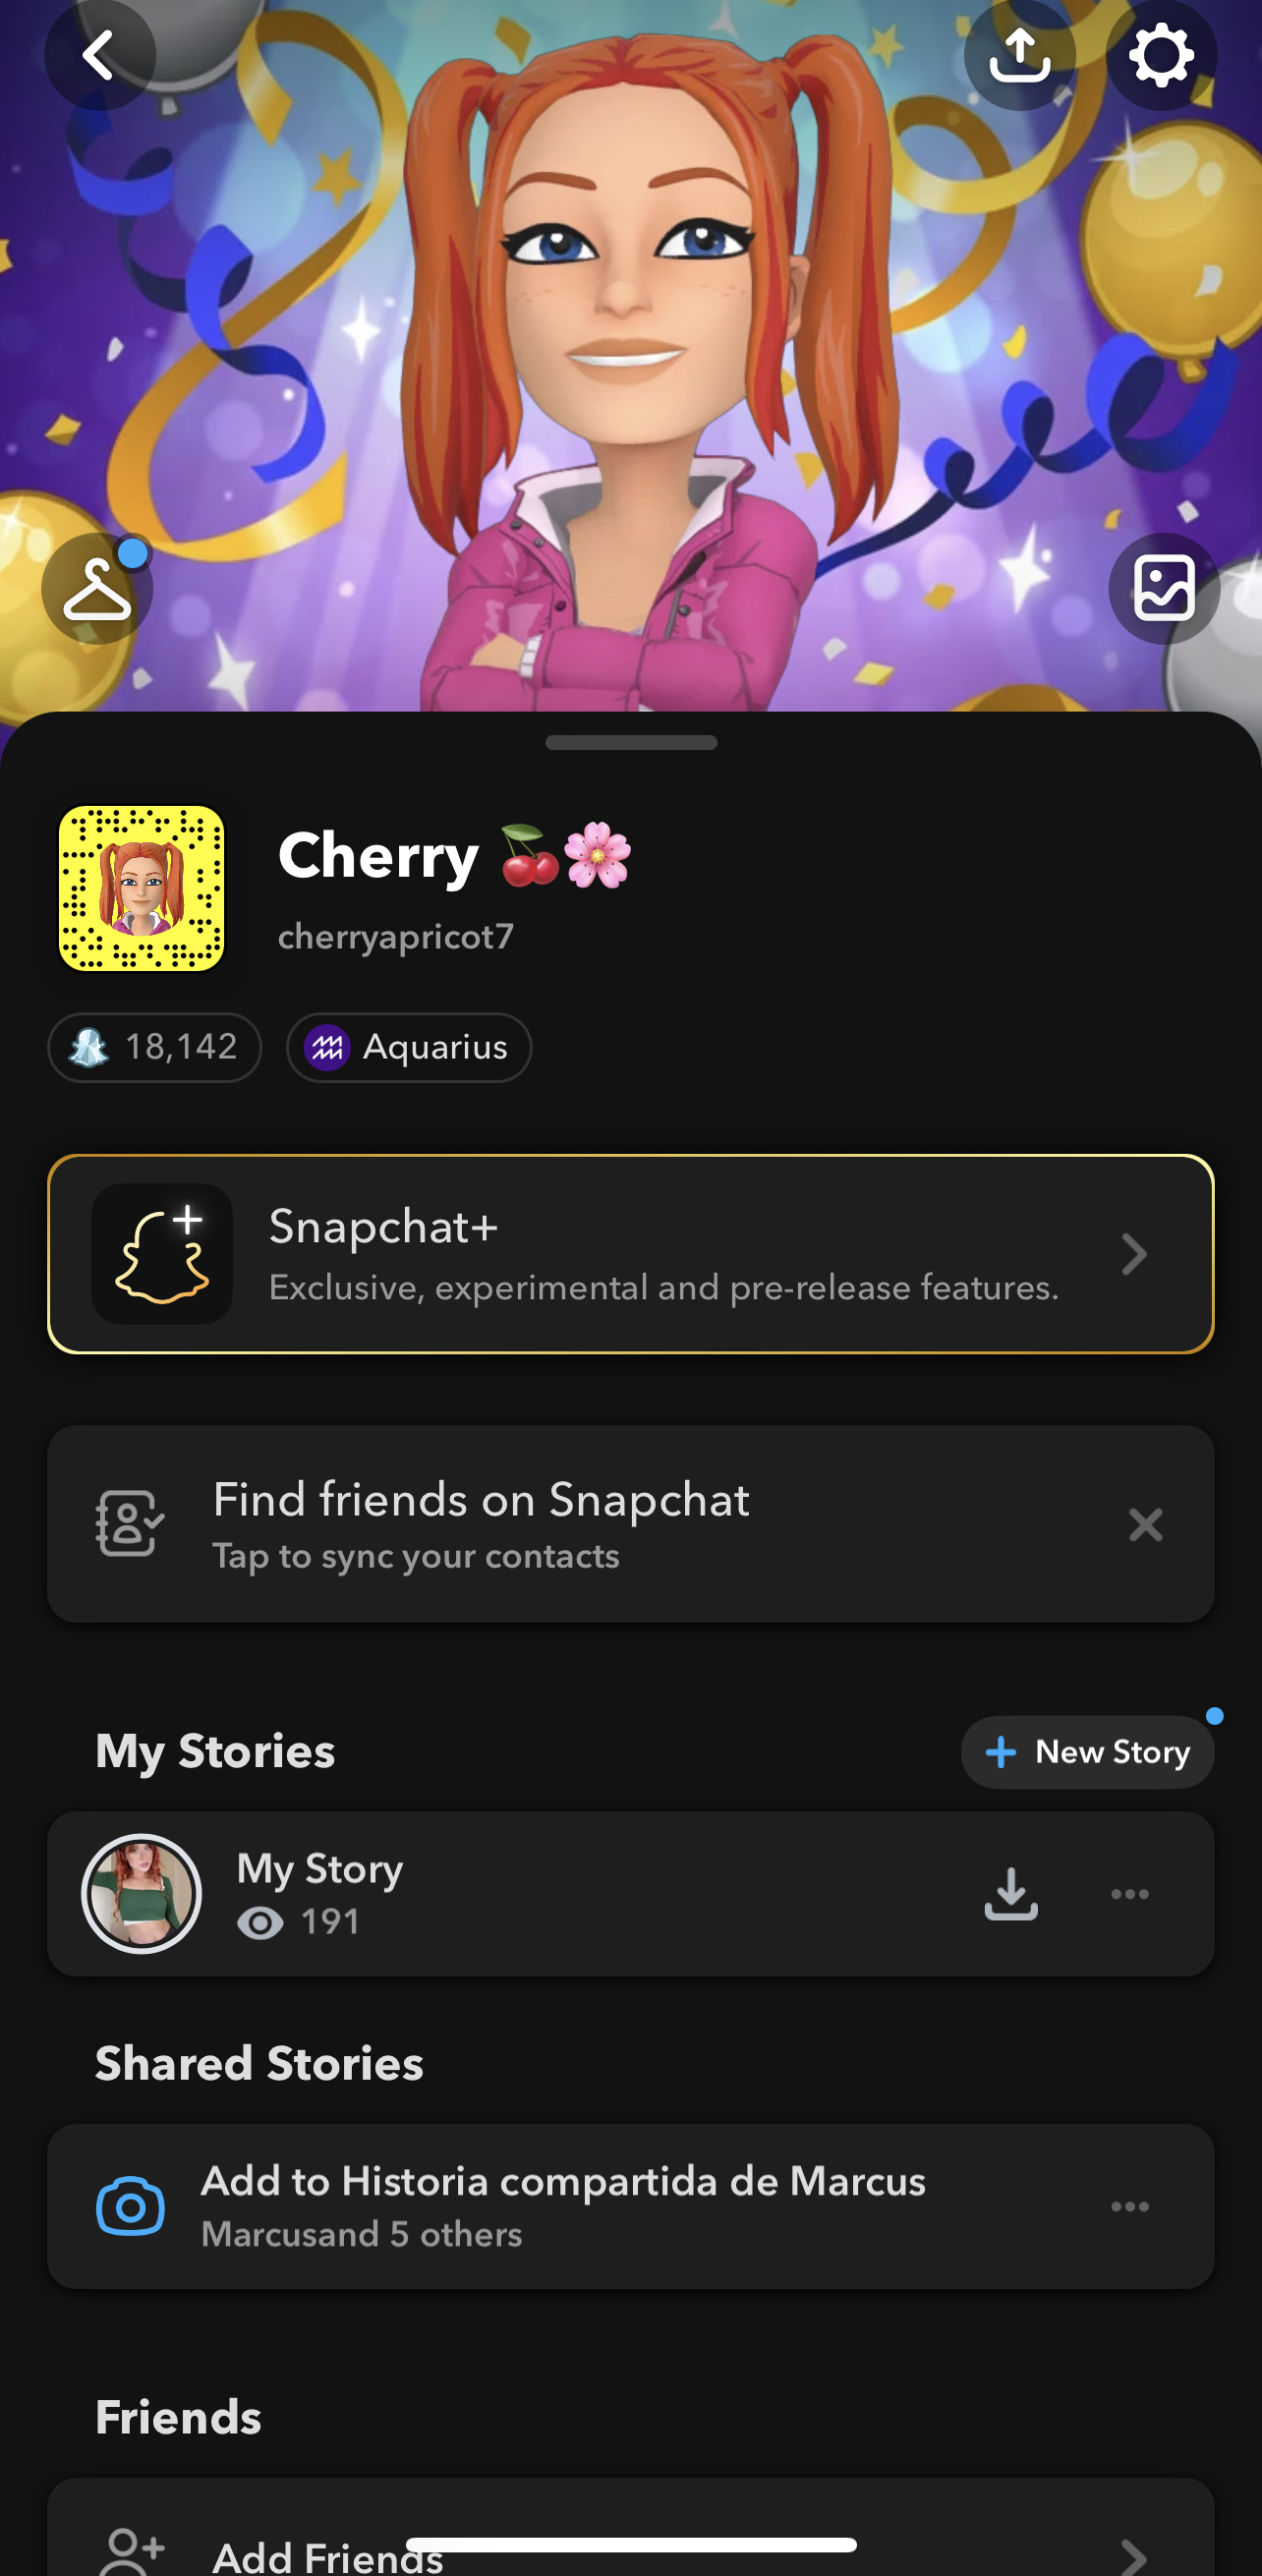 ESCORT AVAILABLE FOR HOOKUP SNAP (cherryapricot7)